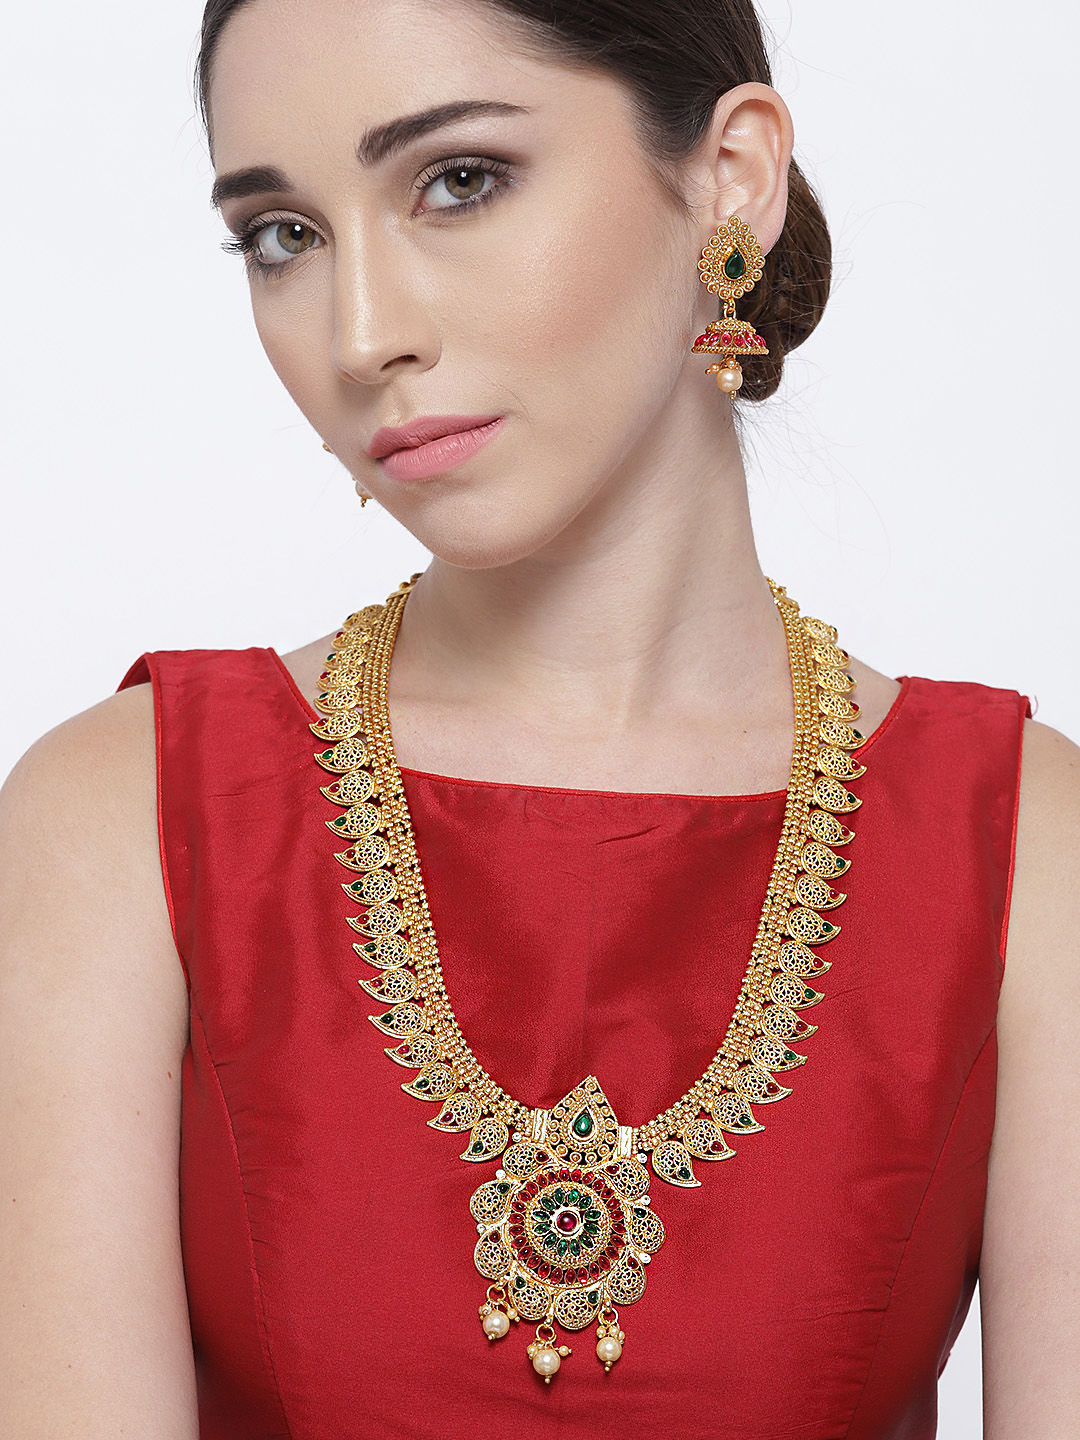 Youbella Green & Red Gold-Plated Stone Studded Textured Jewellery Set